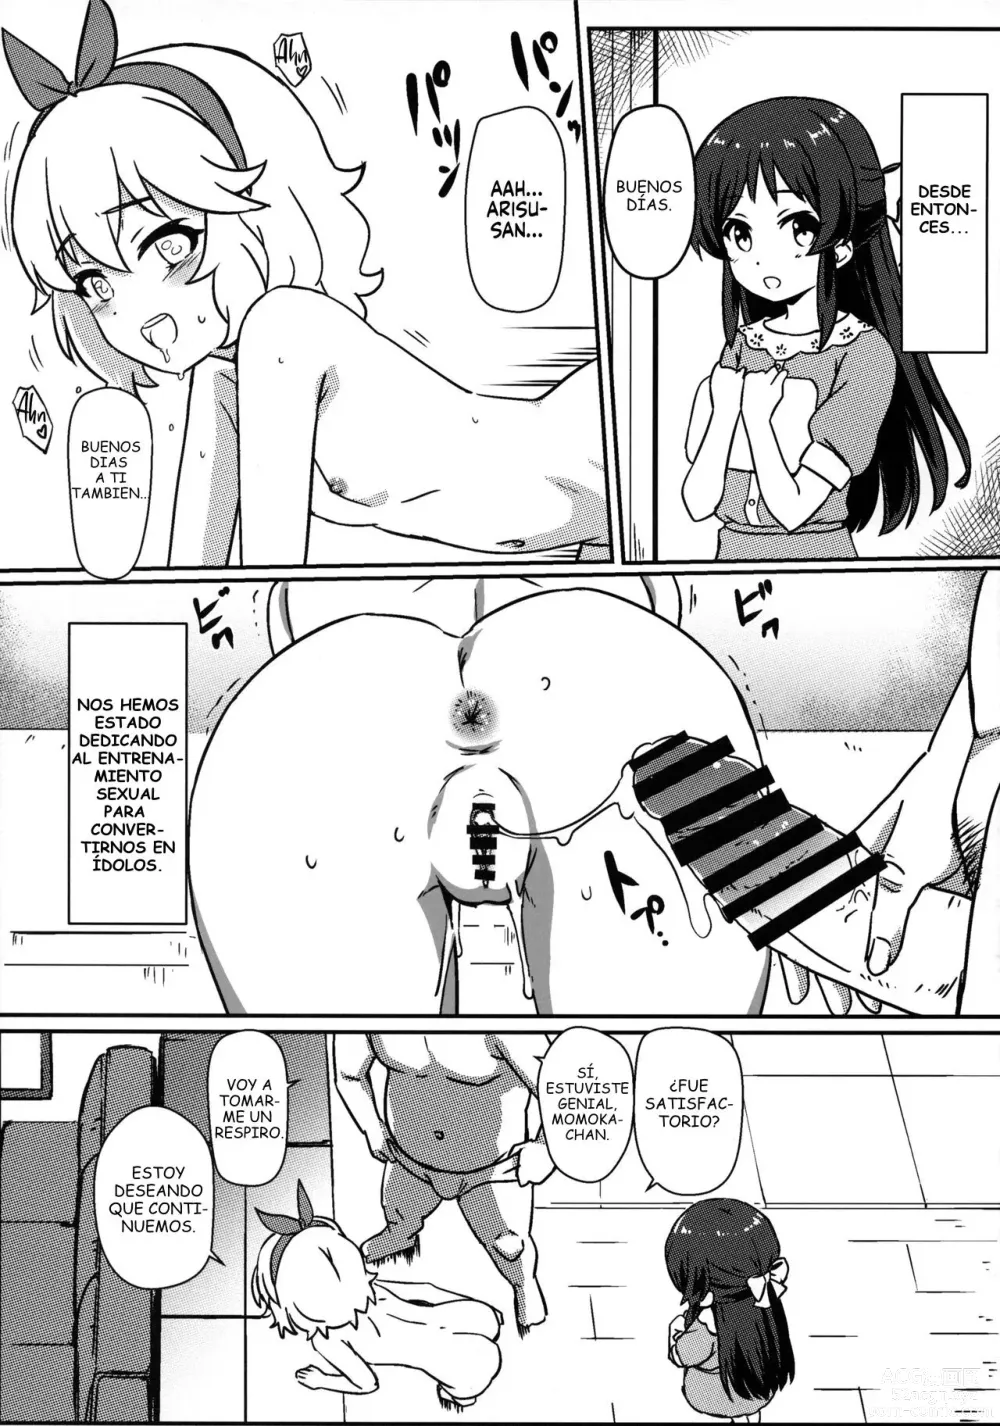 Page 6 of doujinshi Third Entertainment Division's Hypnosis Lessons